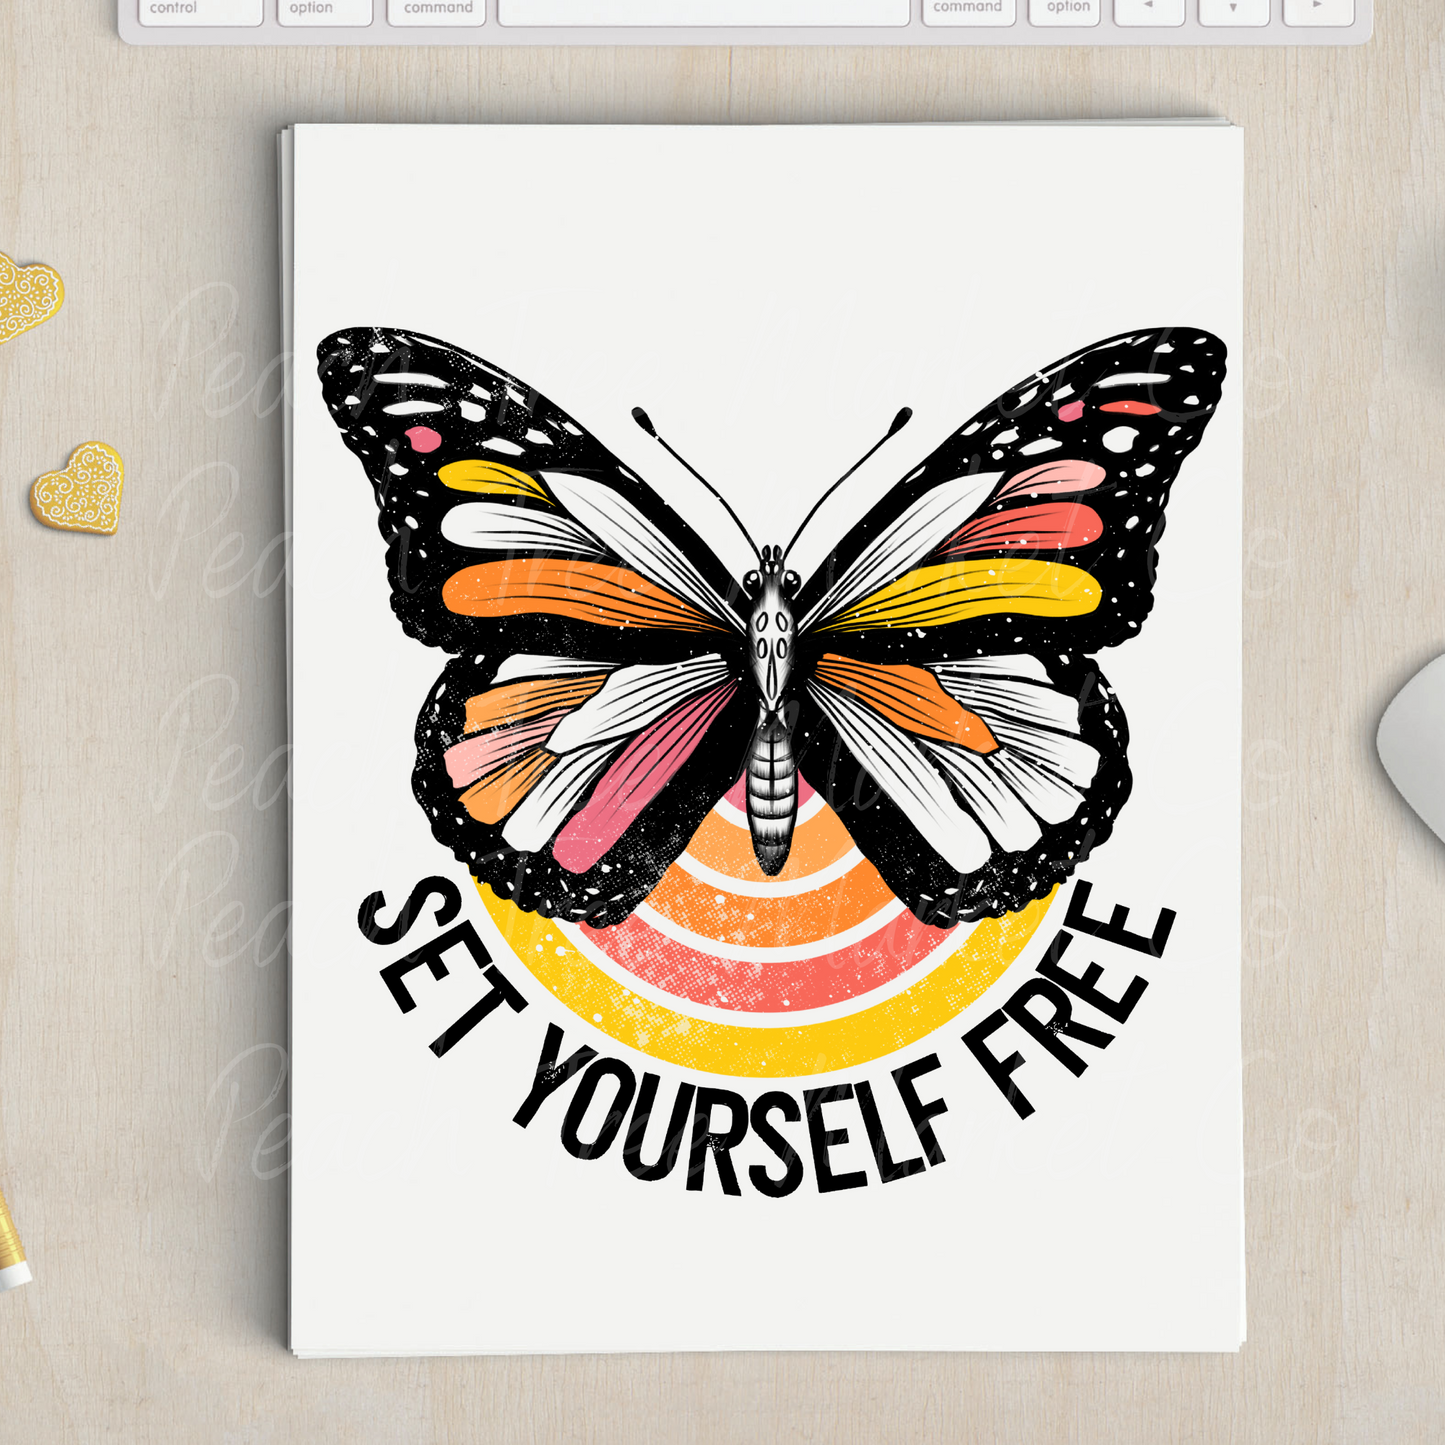 Set Yourself Free Ready To Press Sublimation Transfer